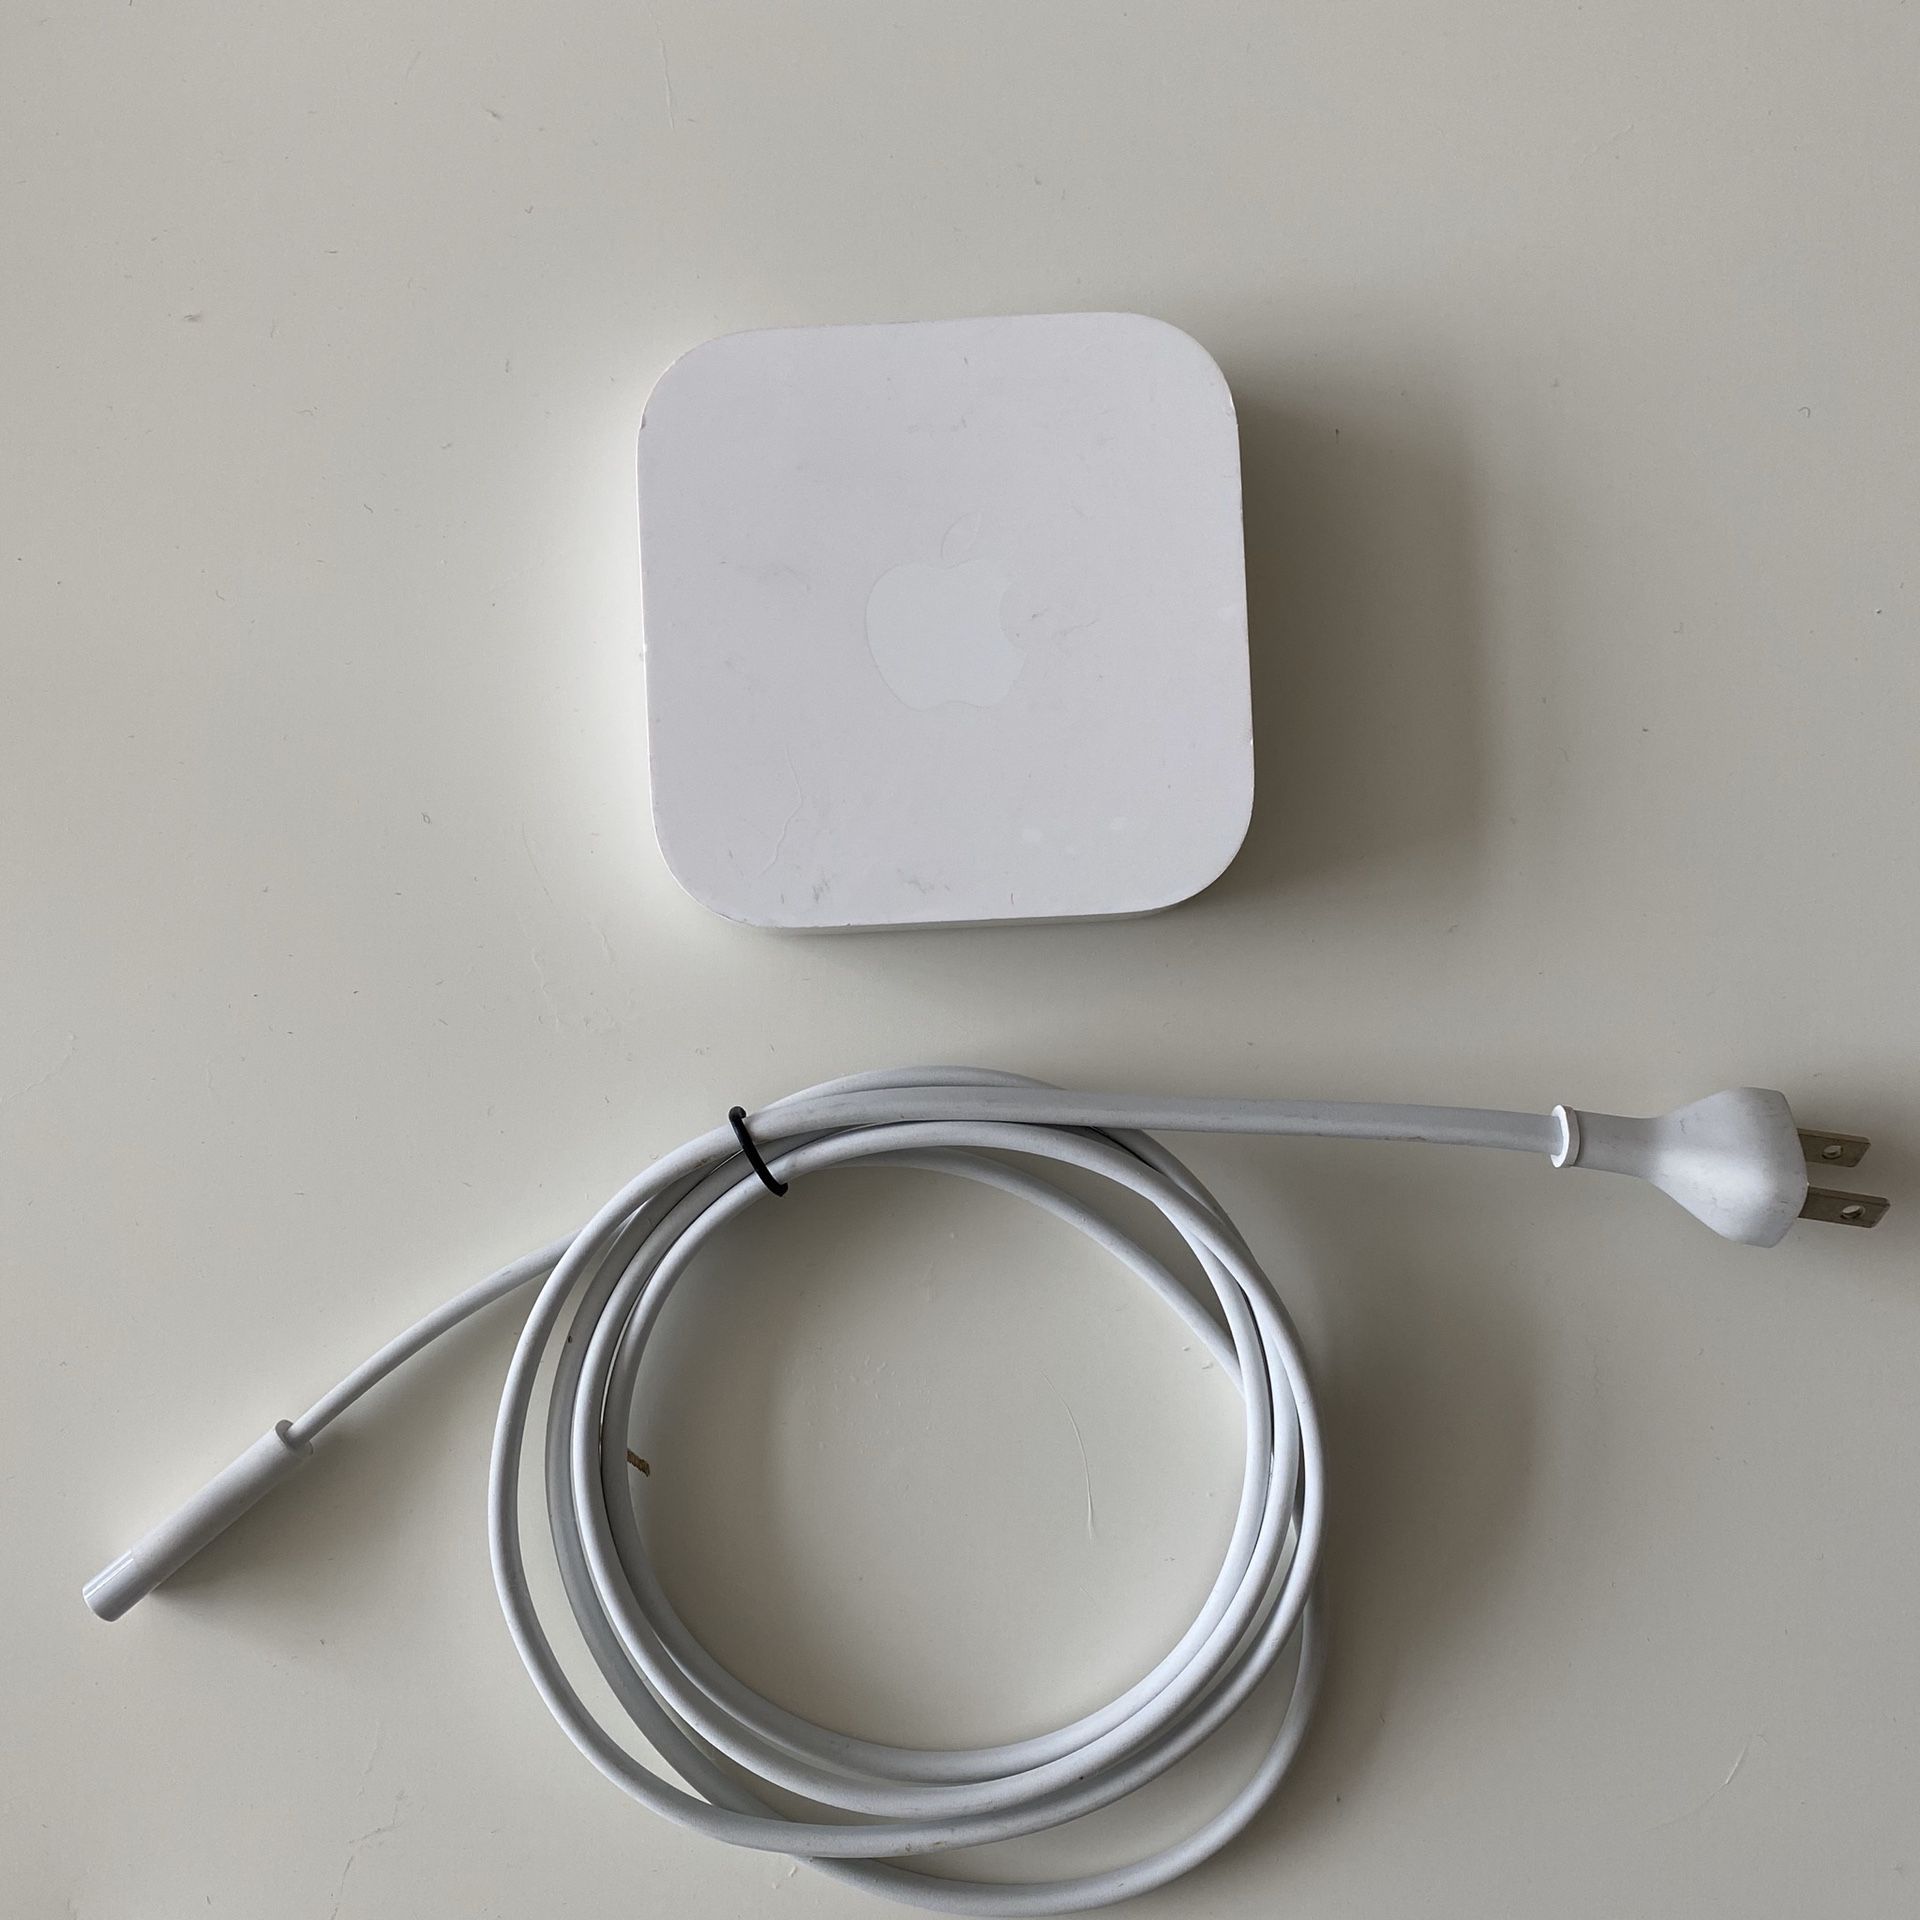 Apple WiFi router